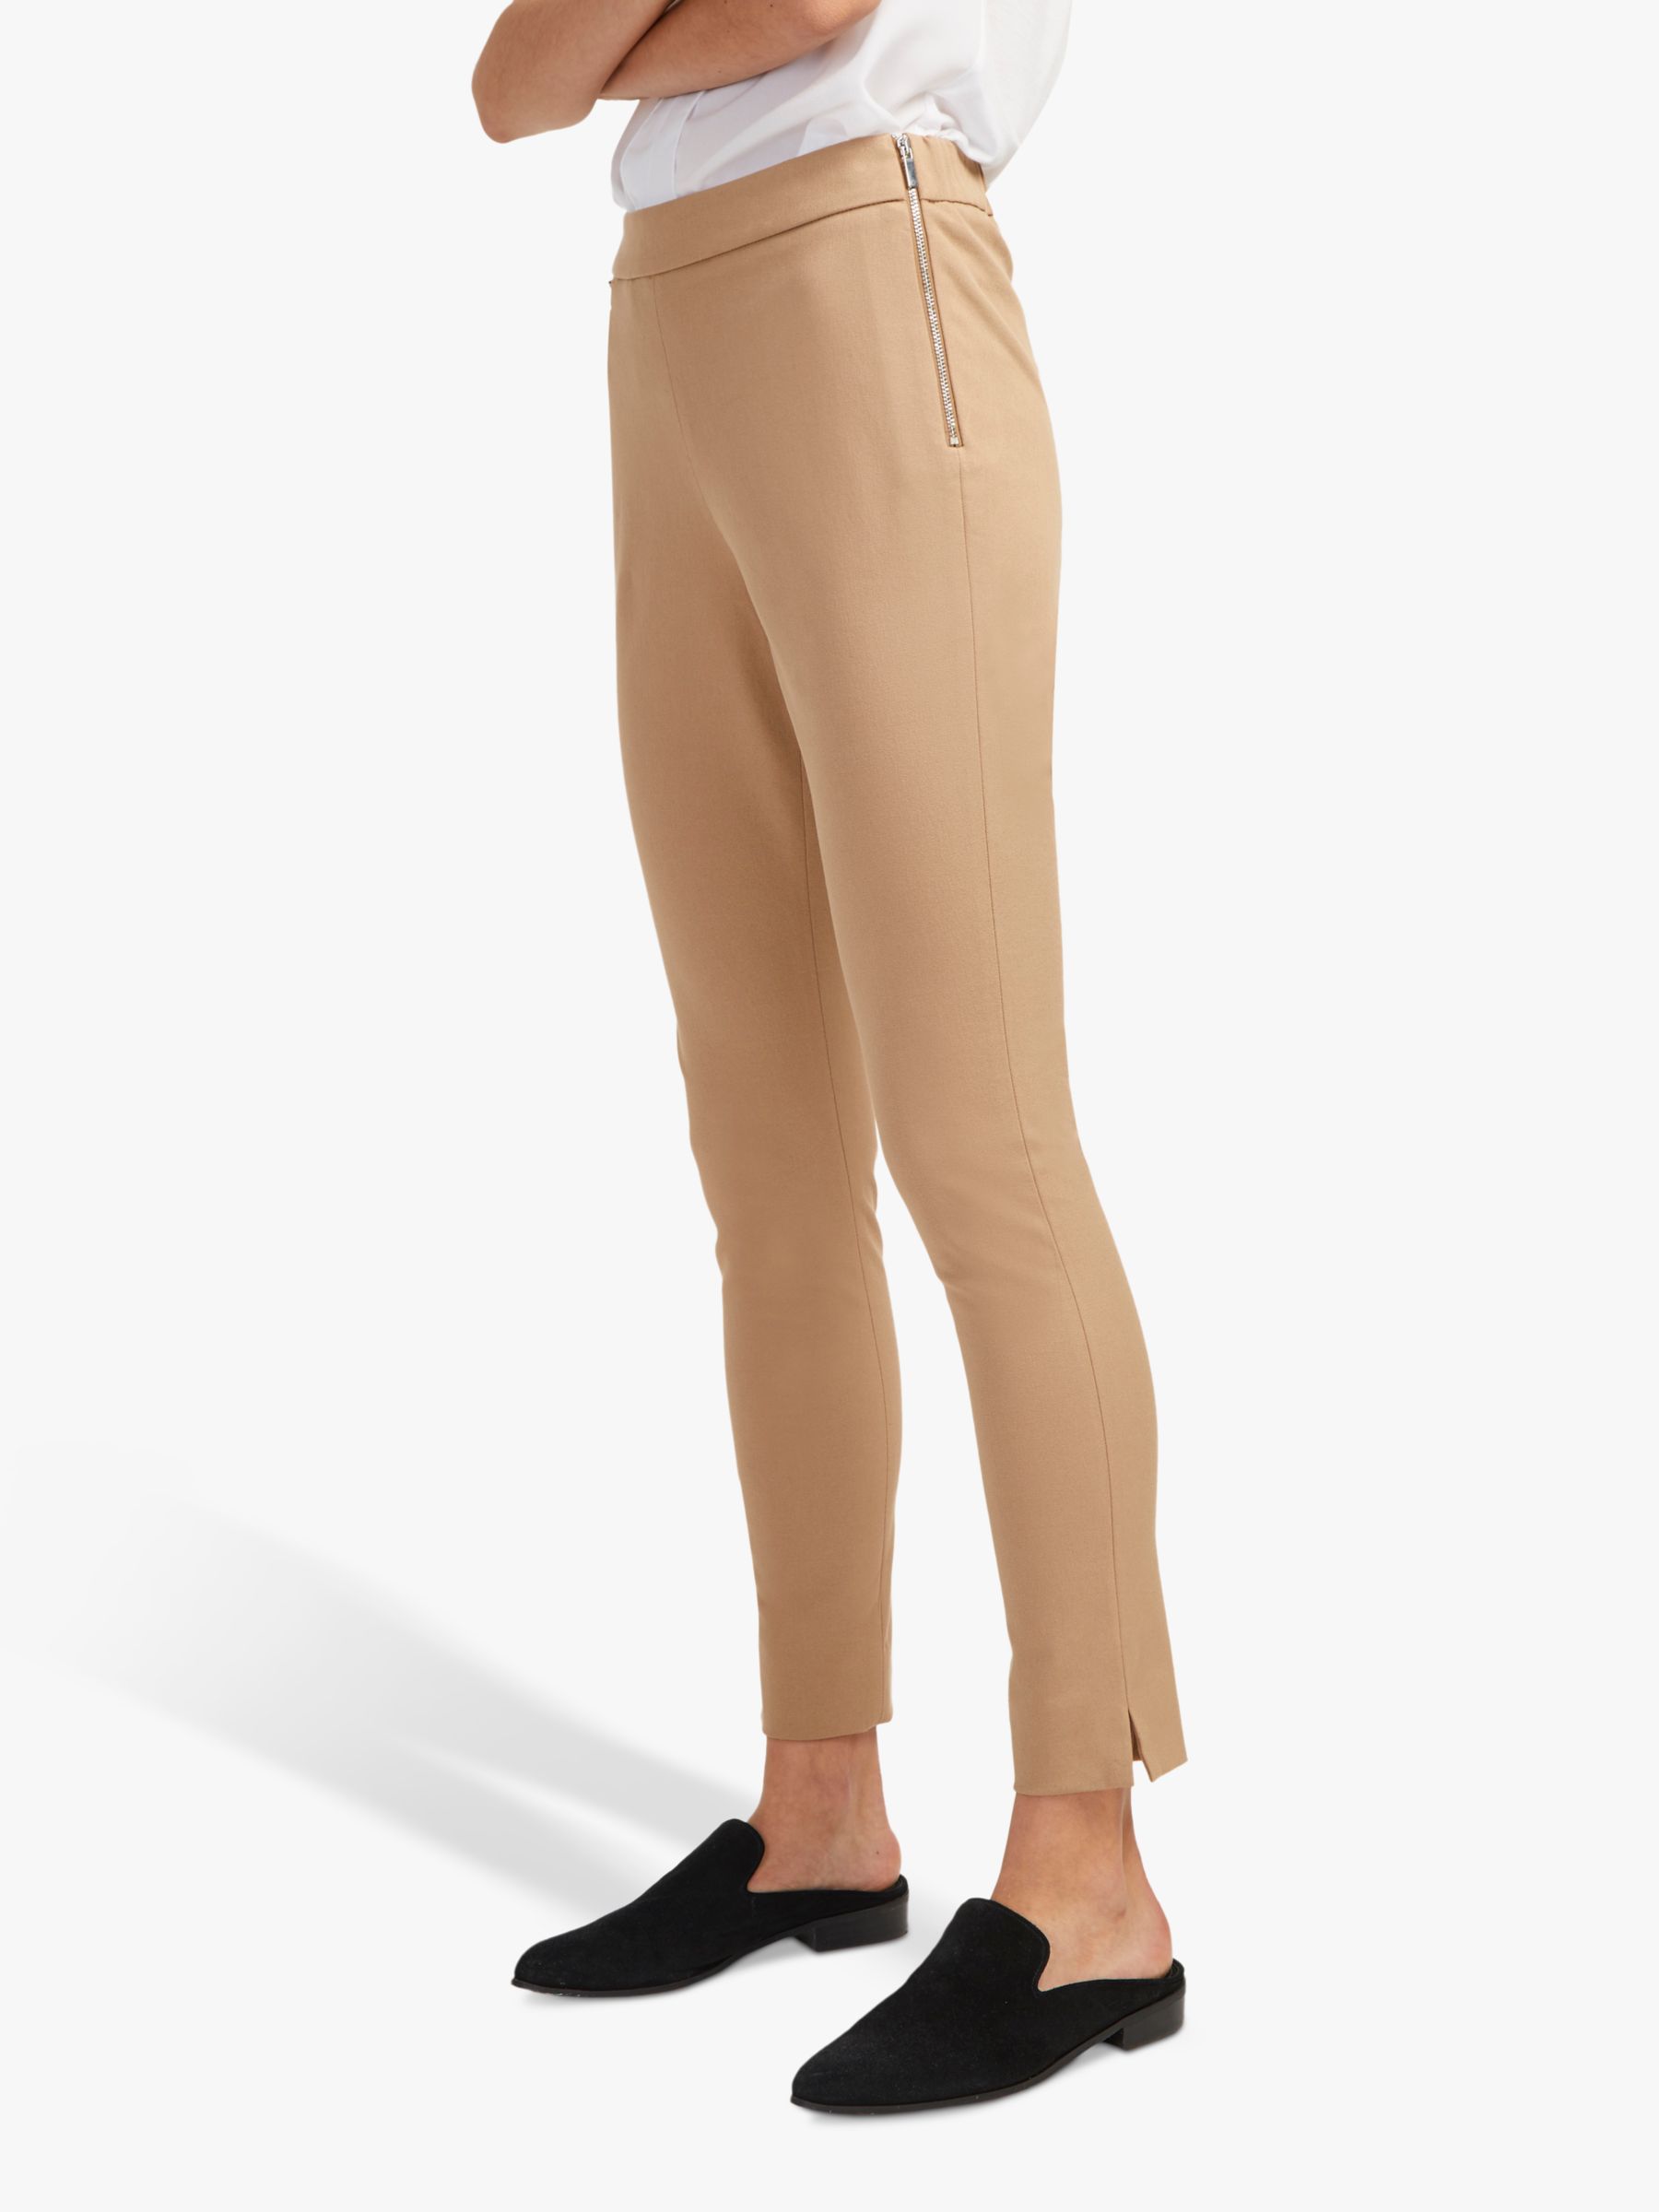 French Connection Kara Skinny Trousers, Wet Sand